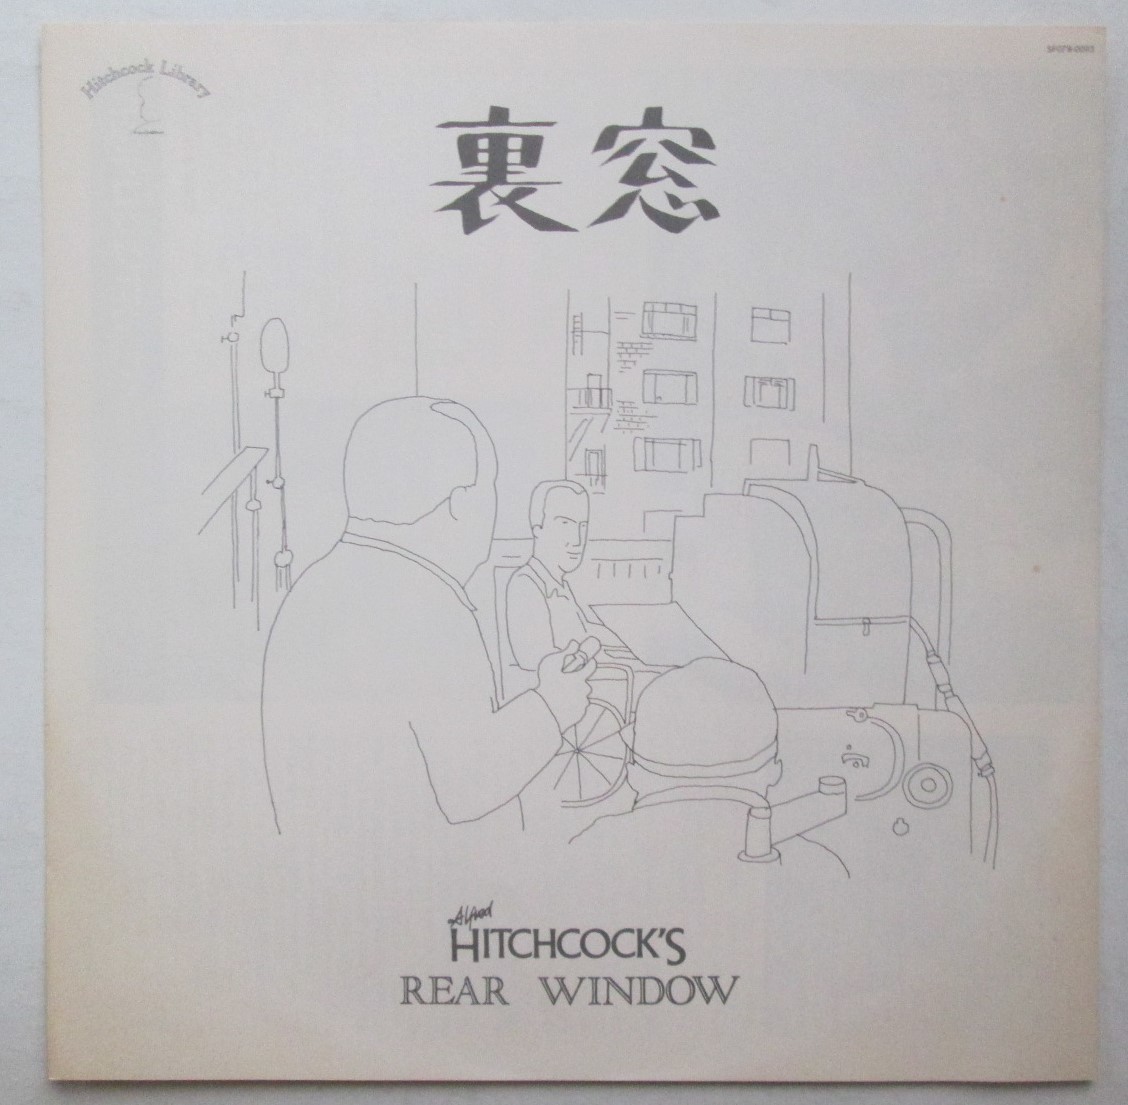  reverse side window / direction Alfred * hitch cook, James *schuwa-to, Grace * Kelly 